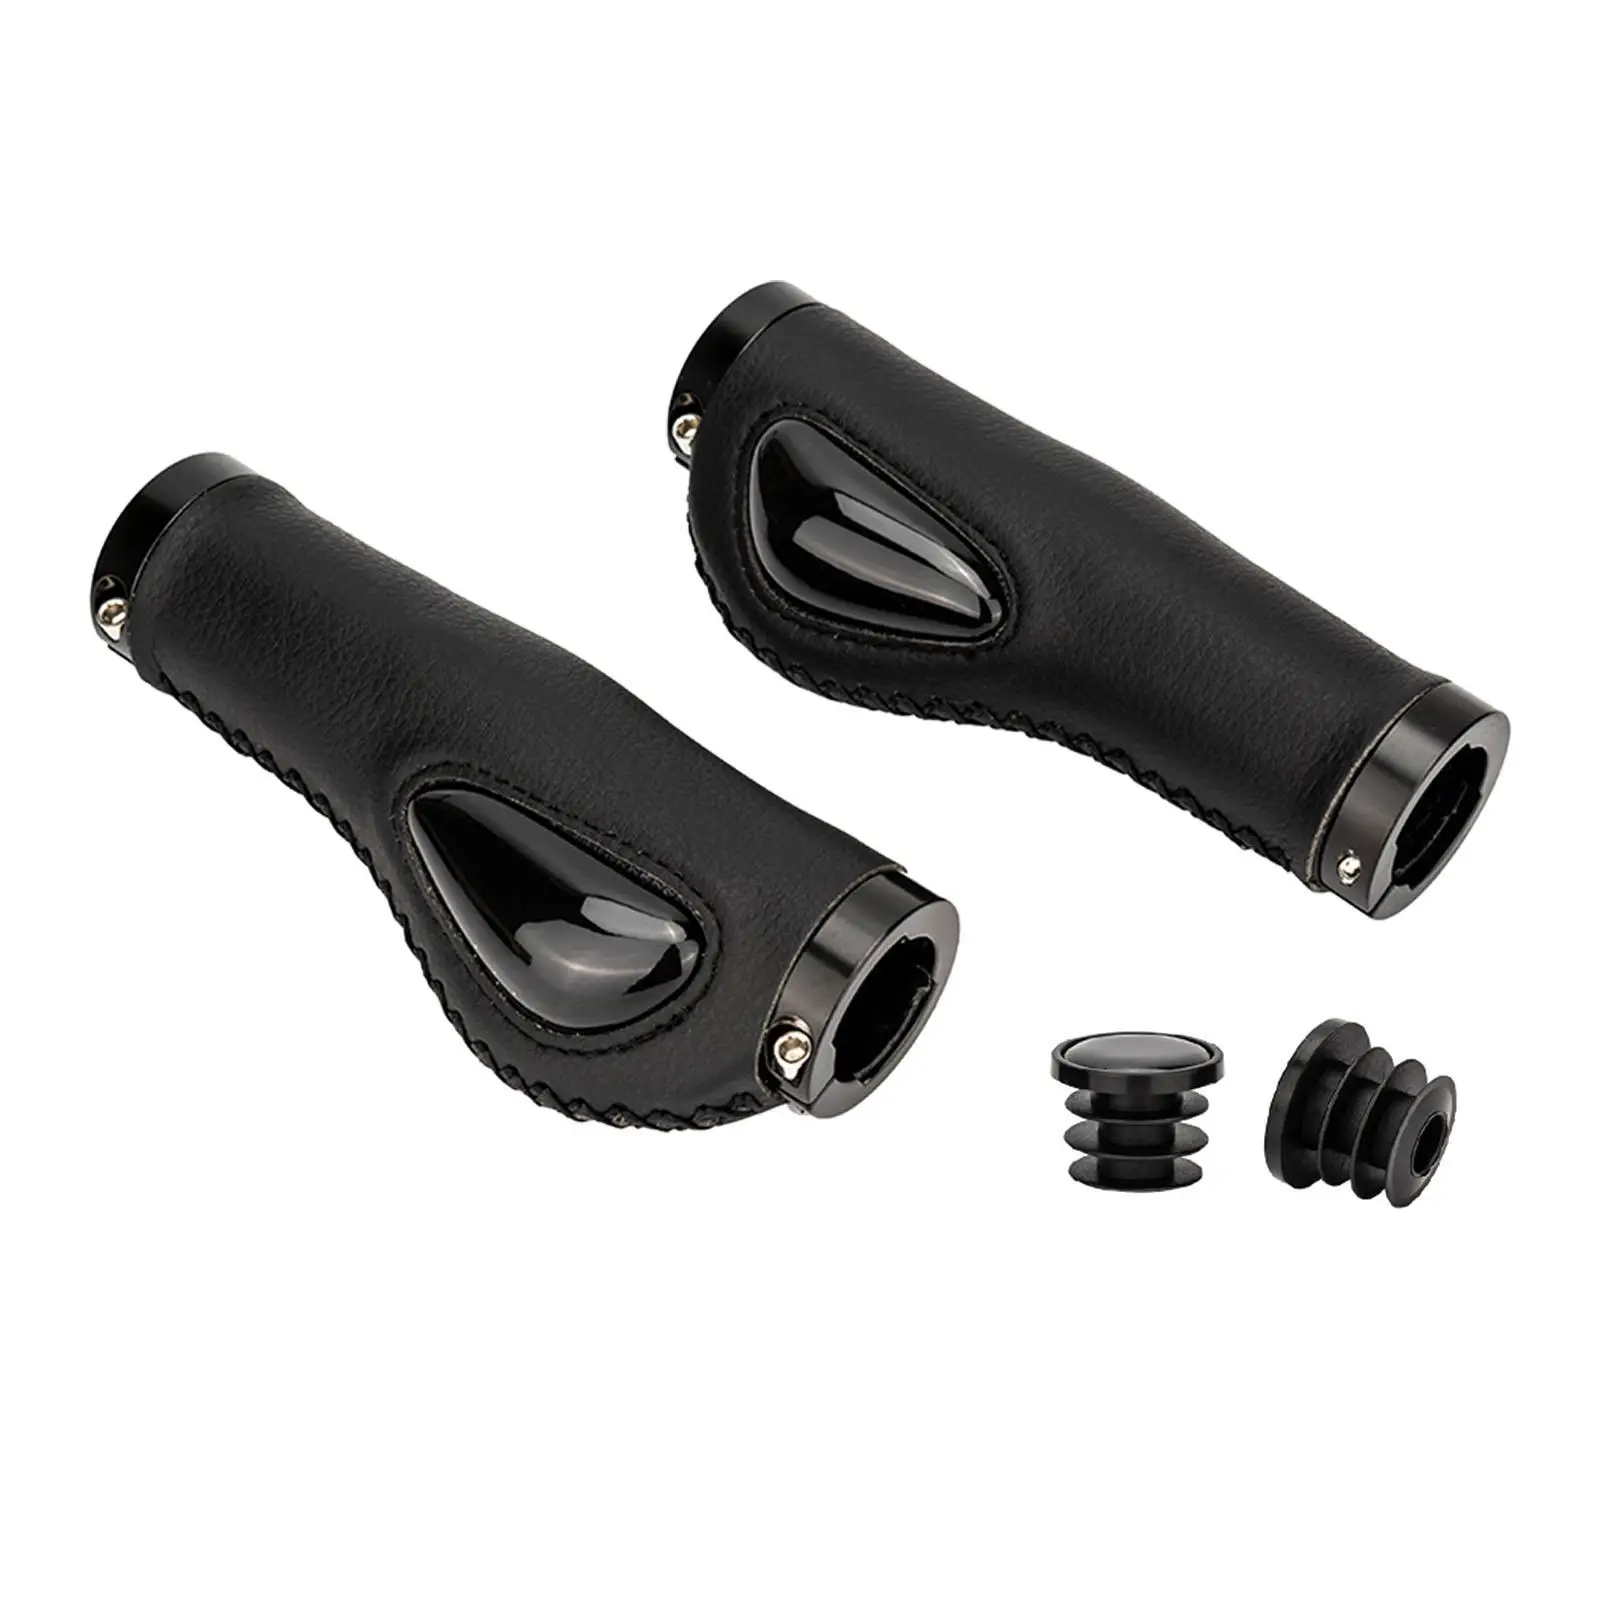 Comfort MTB Bike Handlebar Grips Shock Absorbing Liquid Silicone Sleeve Replacement for Mountain Road Bike Cycling Scooter